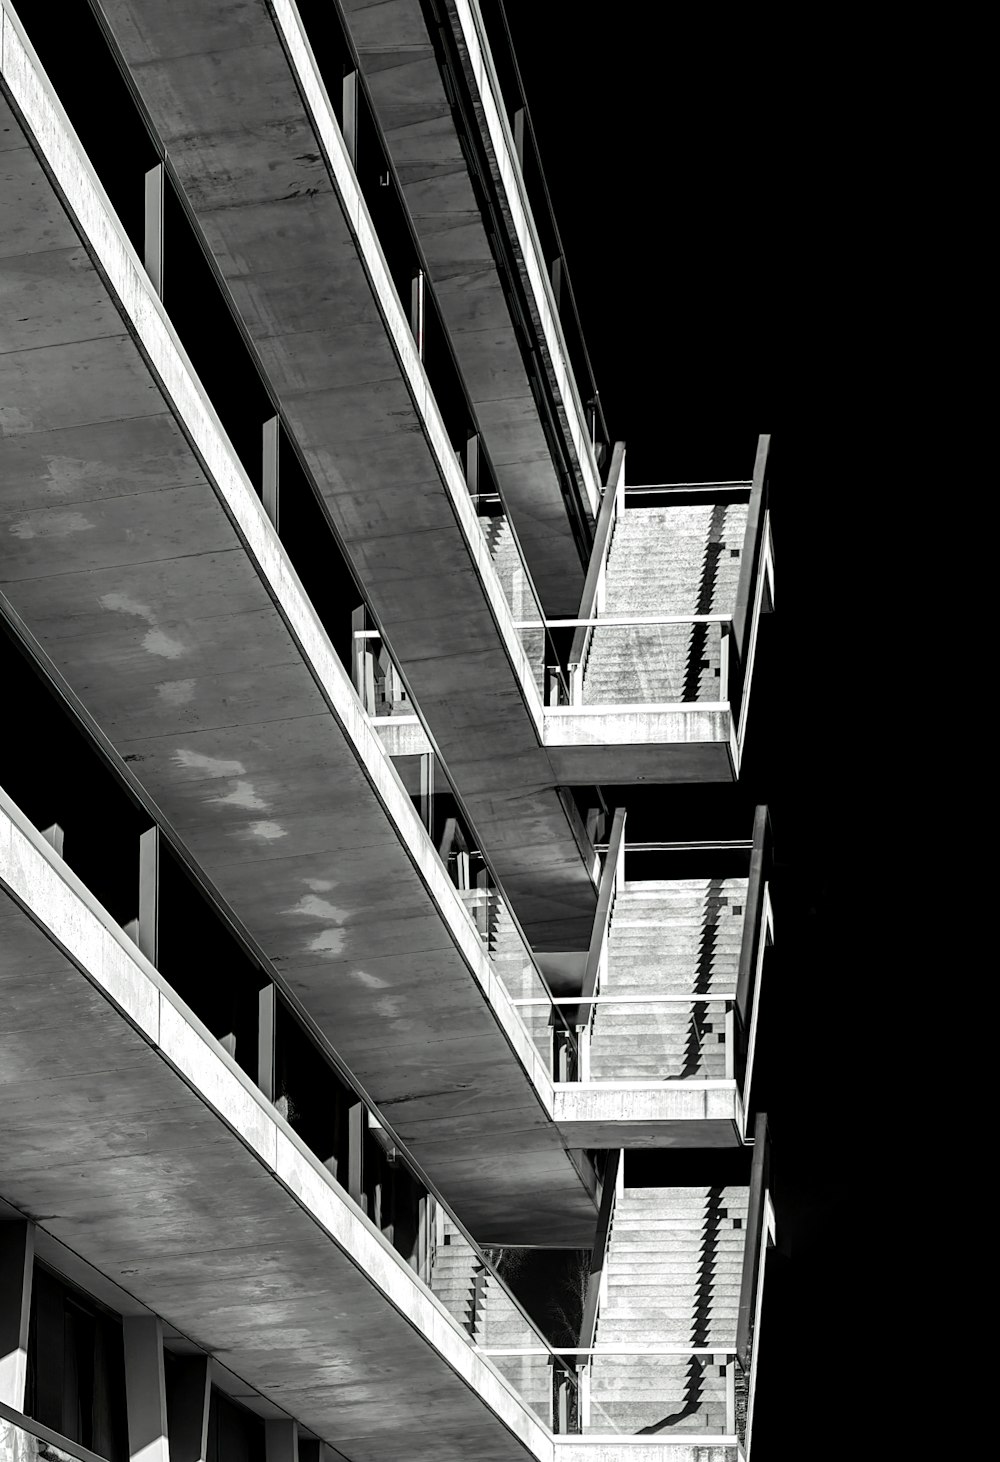 a black and white photo of a building with balconies